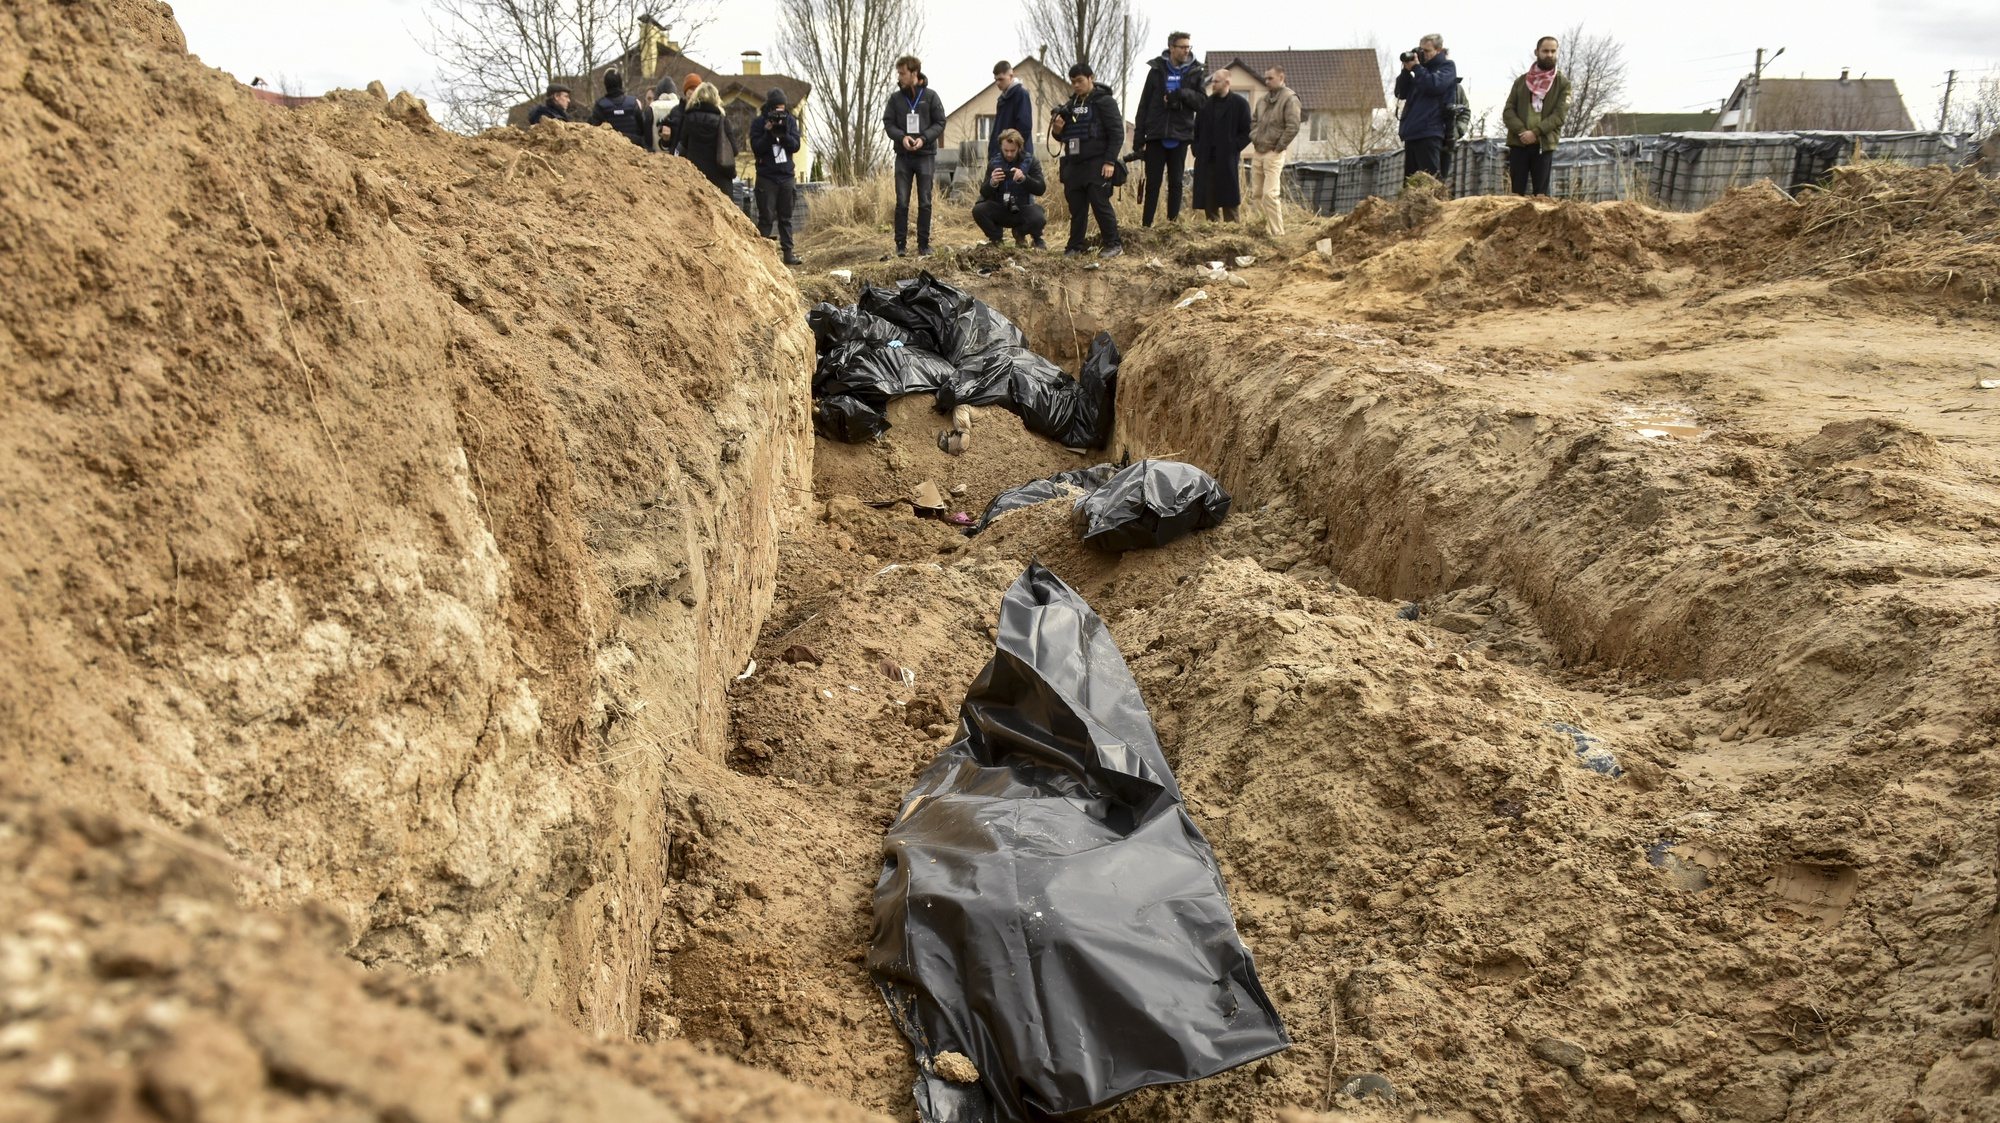 epa09870772 Bodies of civilians in plastic bags lay in a mass grave in Bucha city, which was the recaptured by the Ukrainian army, Kyiv (Kiev) area, Ukraine, 04 April 2022. More than 410 bodies of killed civilians were carried from the recaptured territory in Kyiv&#039;s area for exgumation and expert examination. The UN Human Rights Council has decided to launch an investigation into the violations committed after Russia&#039;s full-scale invasion of Ukraine as Ukrainian Parliament reported. On 24 February, Russian troops had entered Ukrainian territory in what the Russian president declared a &#039;special military operation&#039;, resulting in fighting and destruction in the country, a huge flow of refugees, and multiple sanctions against Russia.  EPA/OLEG PETRASYUK ATTENTION: GRAPHIC CONTENT